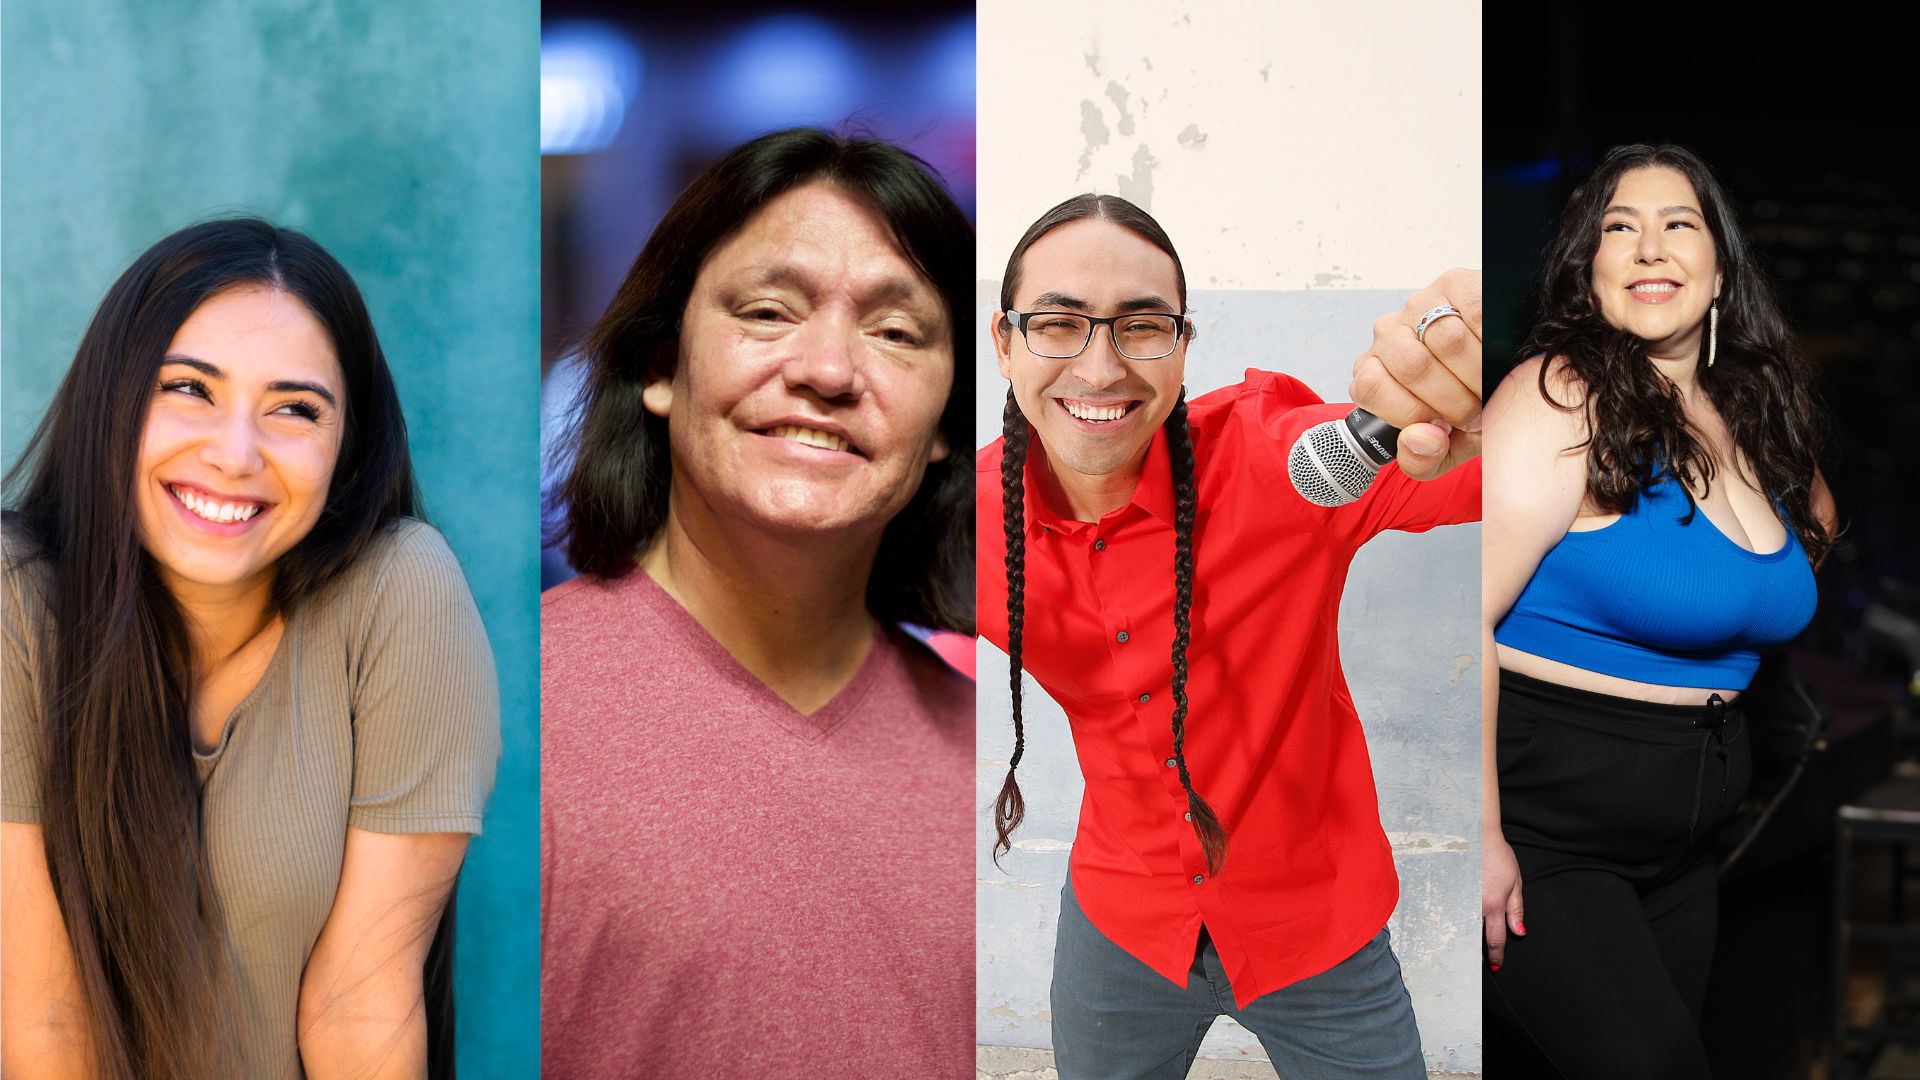 All-Native comedy night, Good Medicine, returns to the stage at OMCA after a sold out 2022 show.